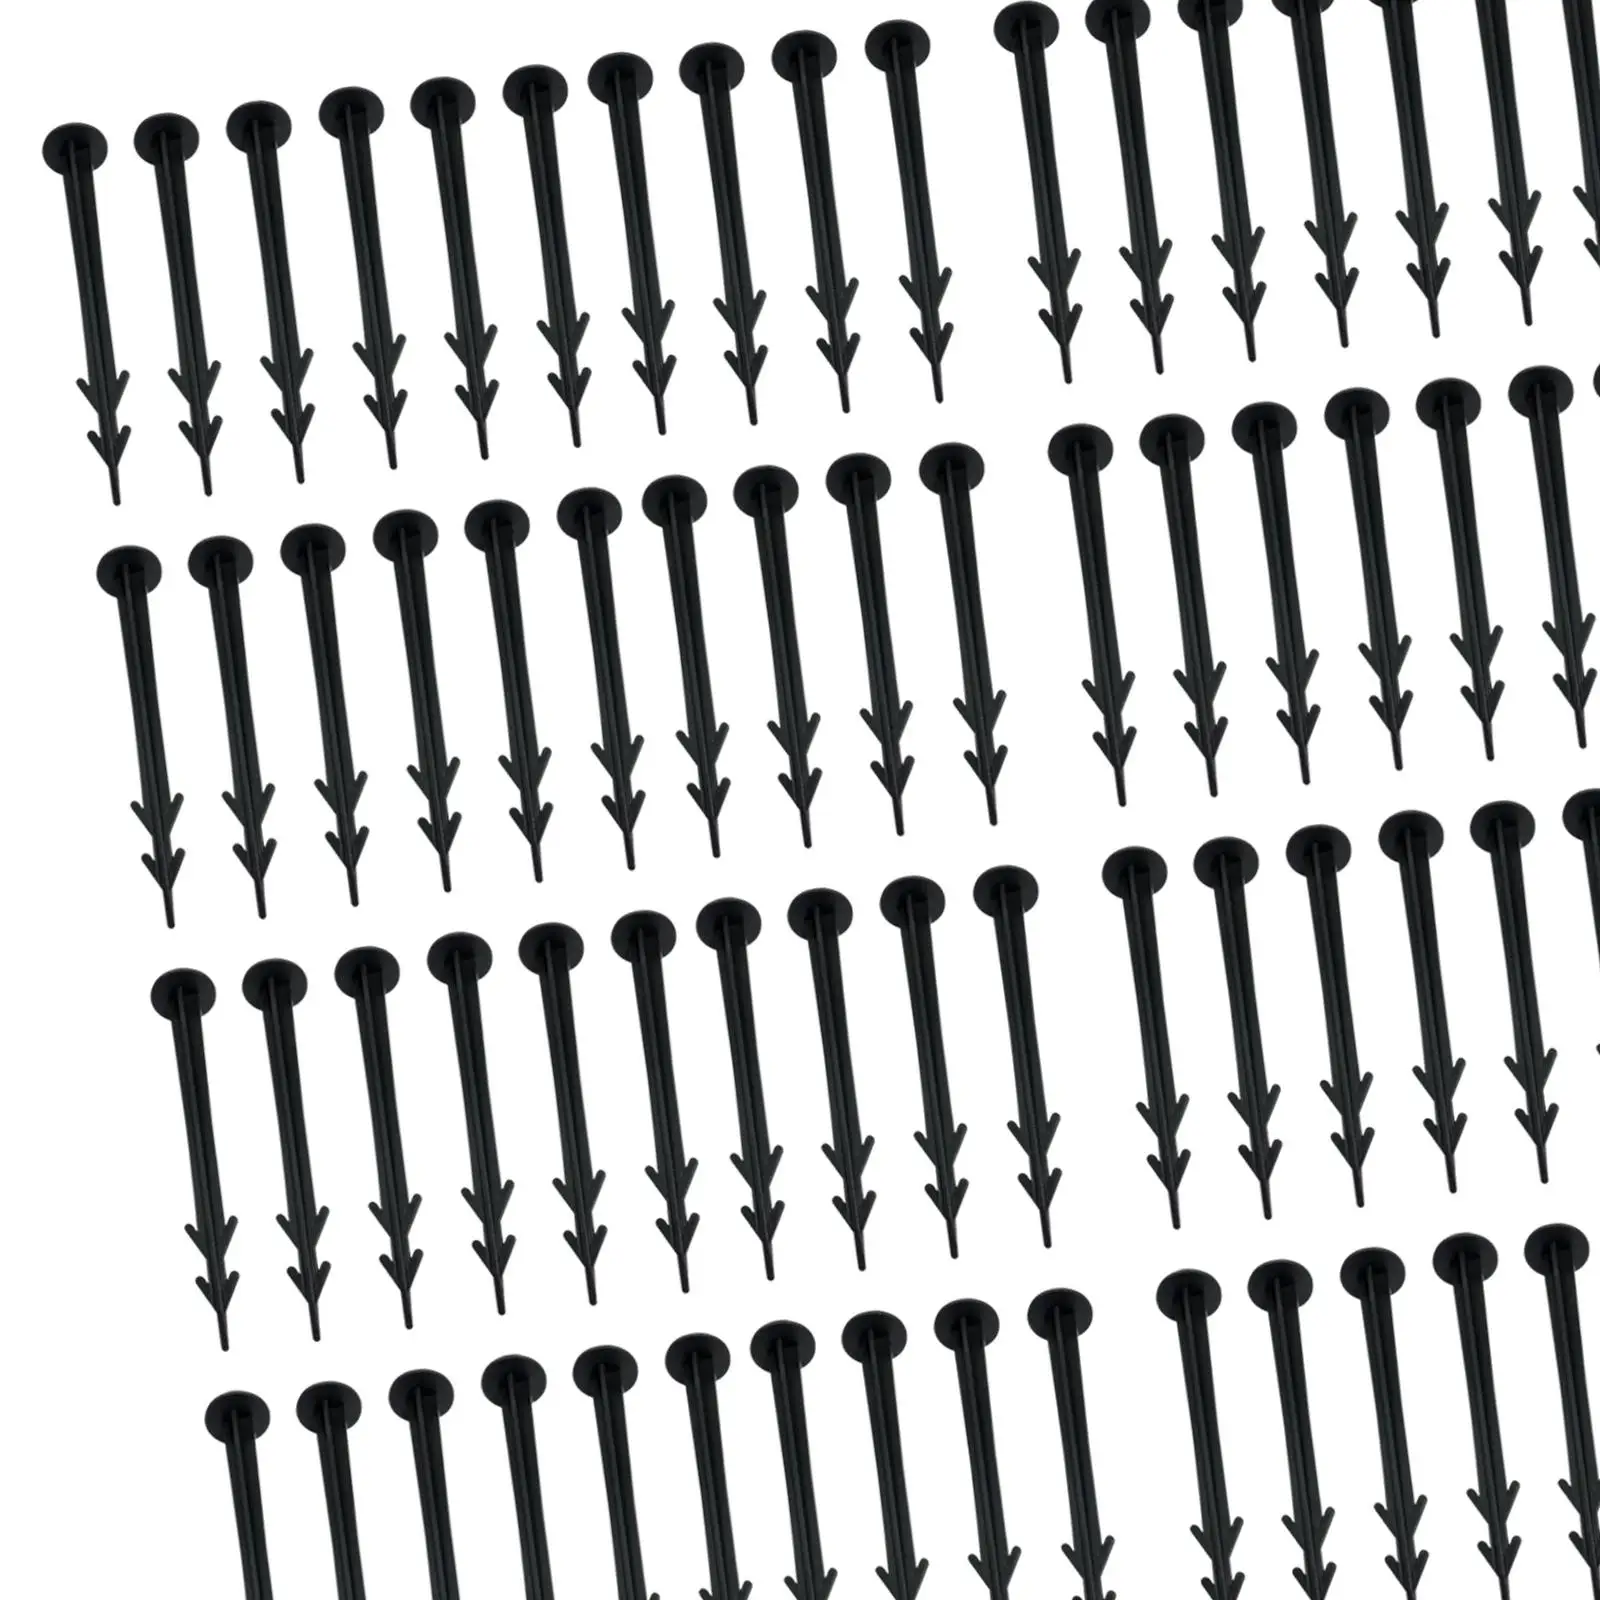 100x Garden Stakes Durable Multifunctional Ground Cover Fixing Anchor Pegs for Holding Down Tents Landscape Fabric Lawn Edging